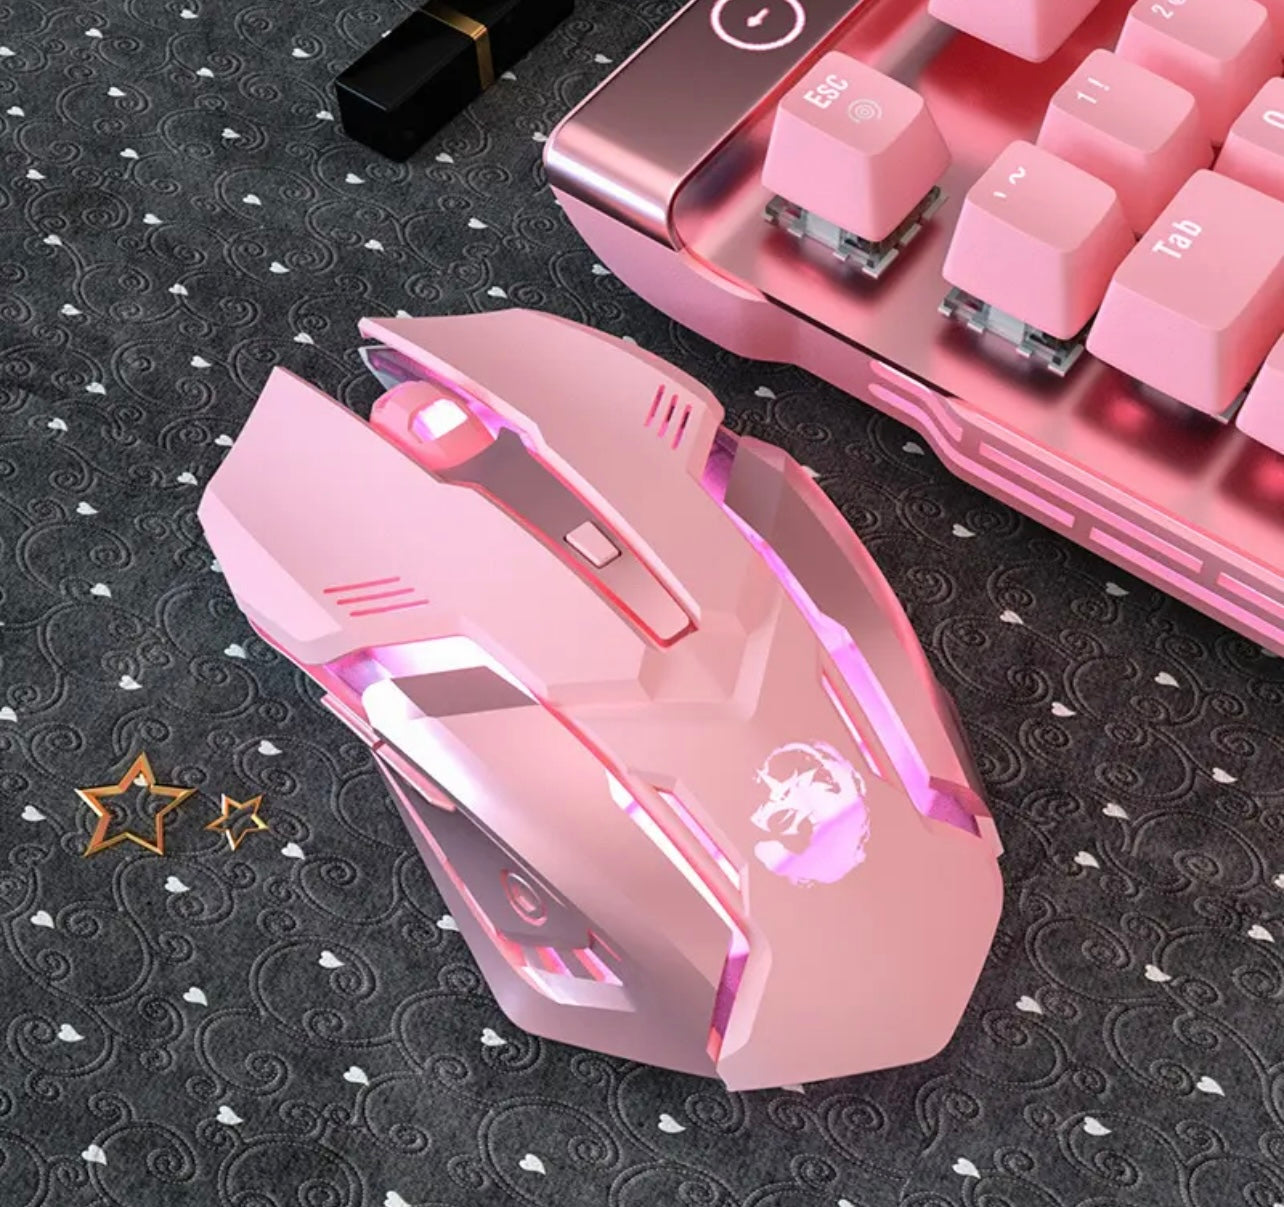 mrs Pinky Gaming mouse